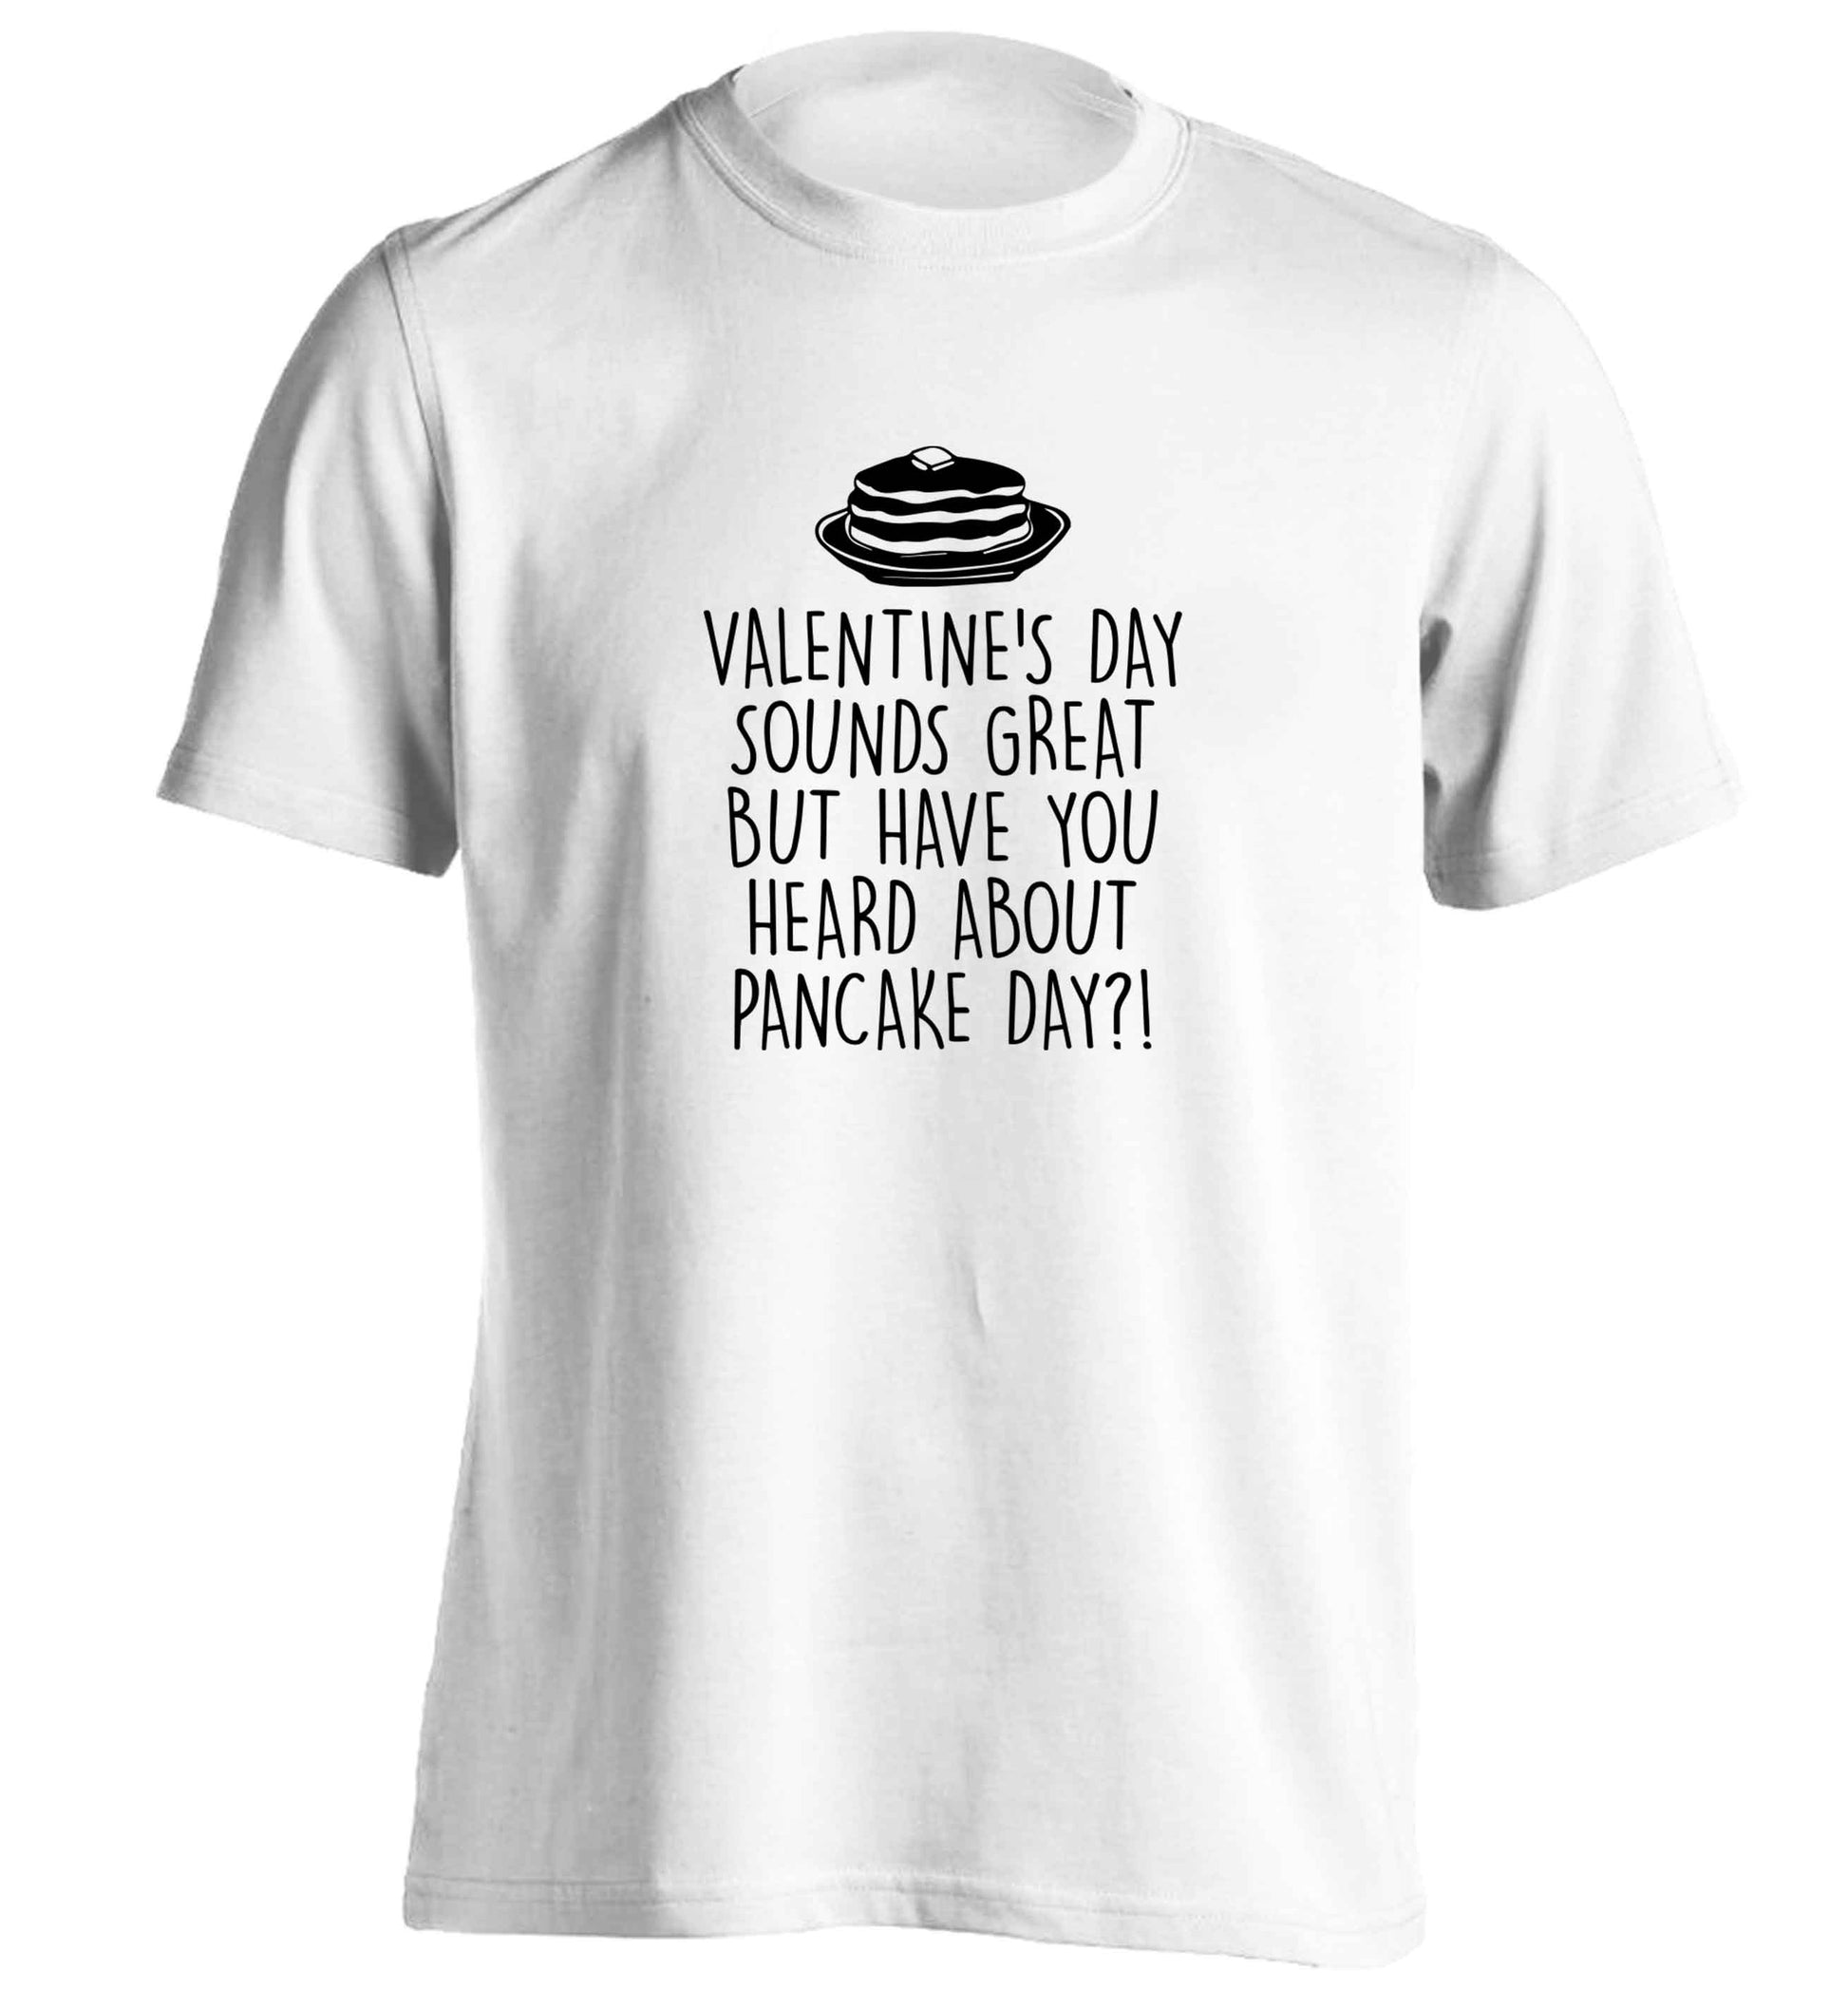 Valentine's day sounds great but have you heard about pancake day?! adults unisex white Tshirt 2XL